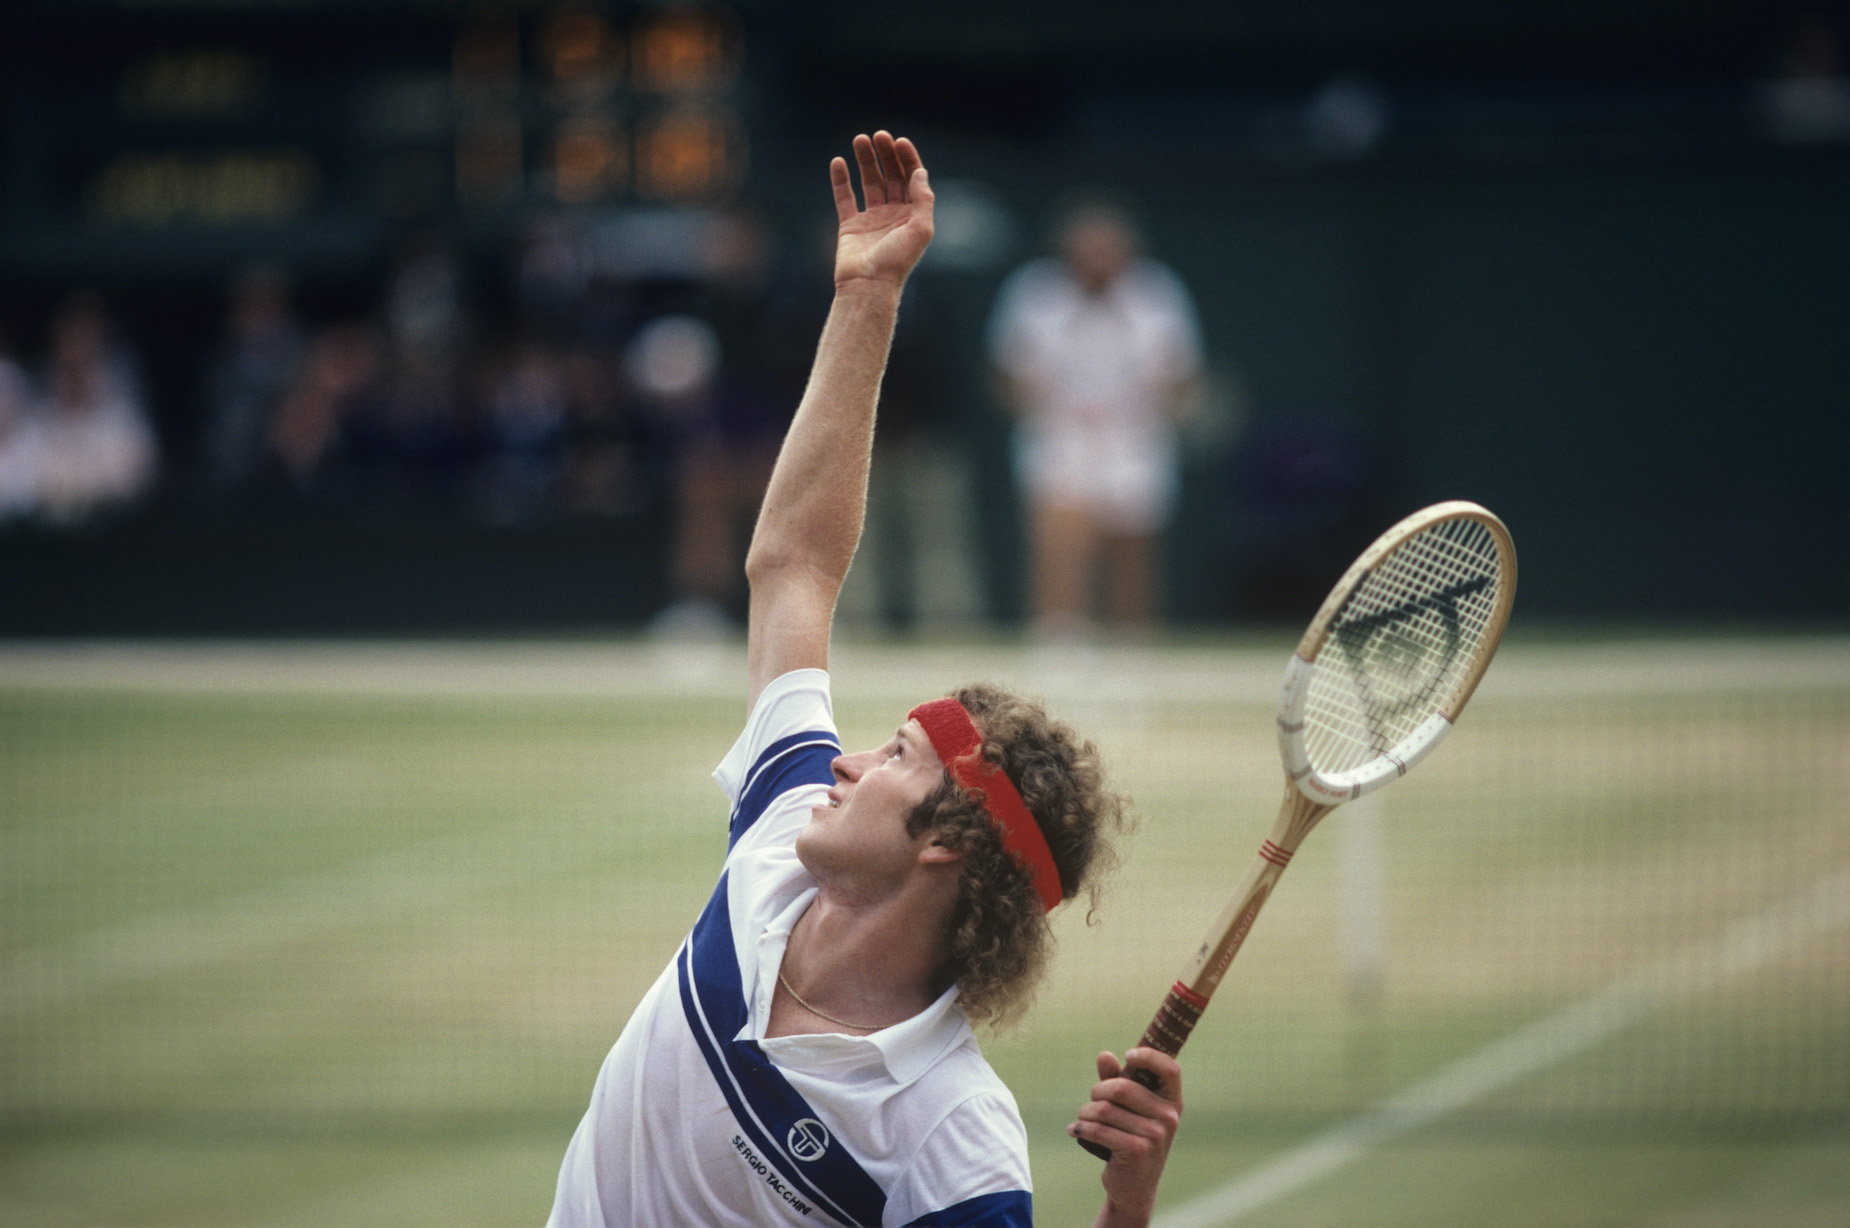 John McEnroe could have made $1 million for a single match against Bjorn Borg but turned it down.